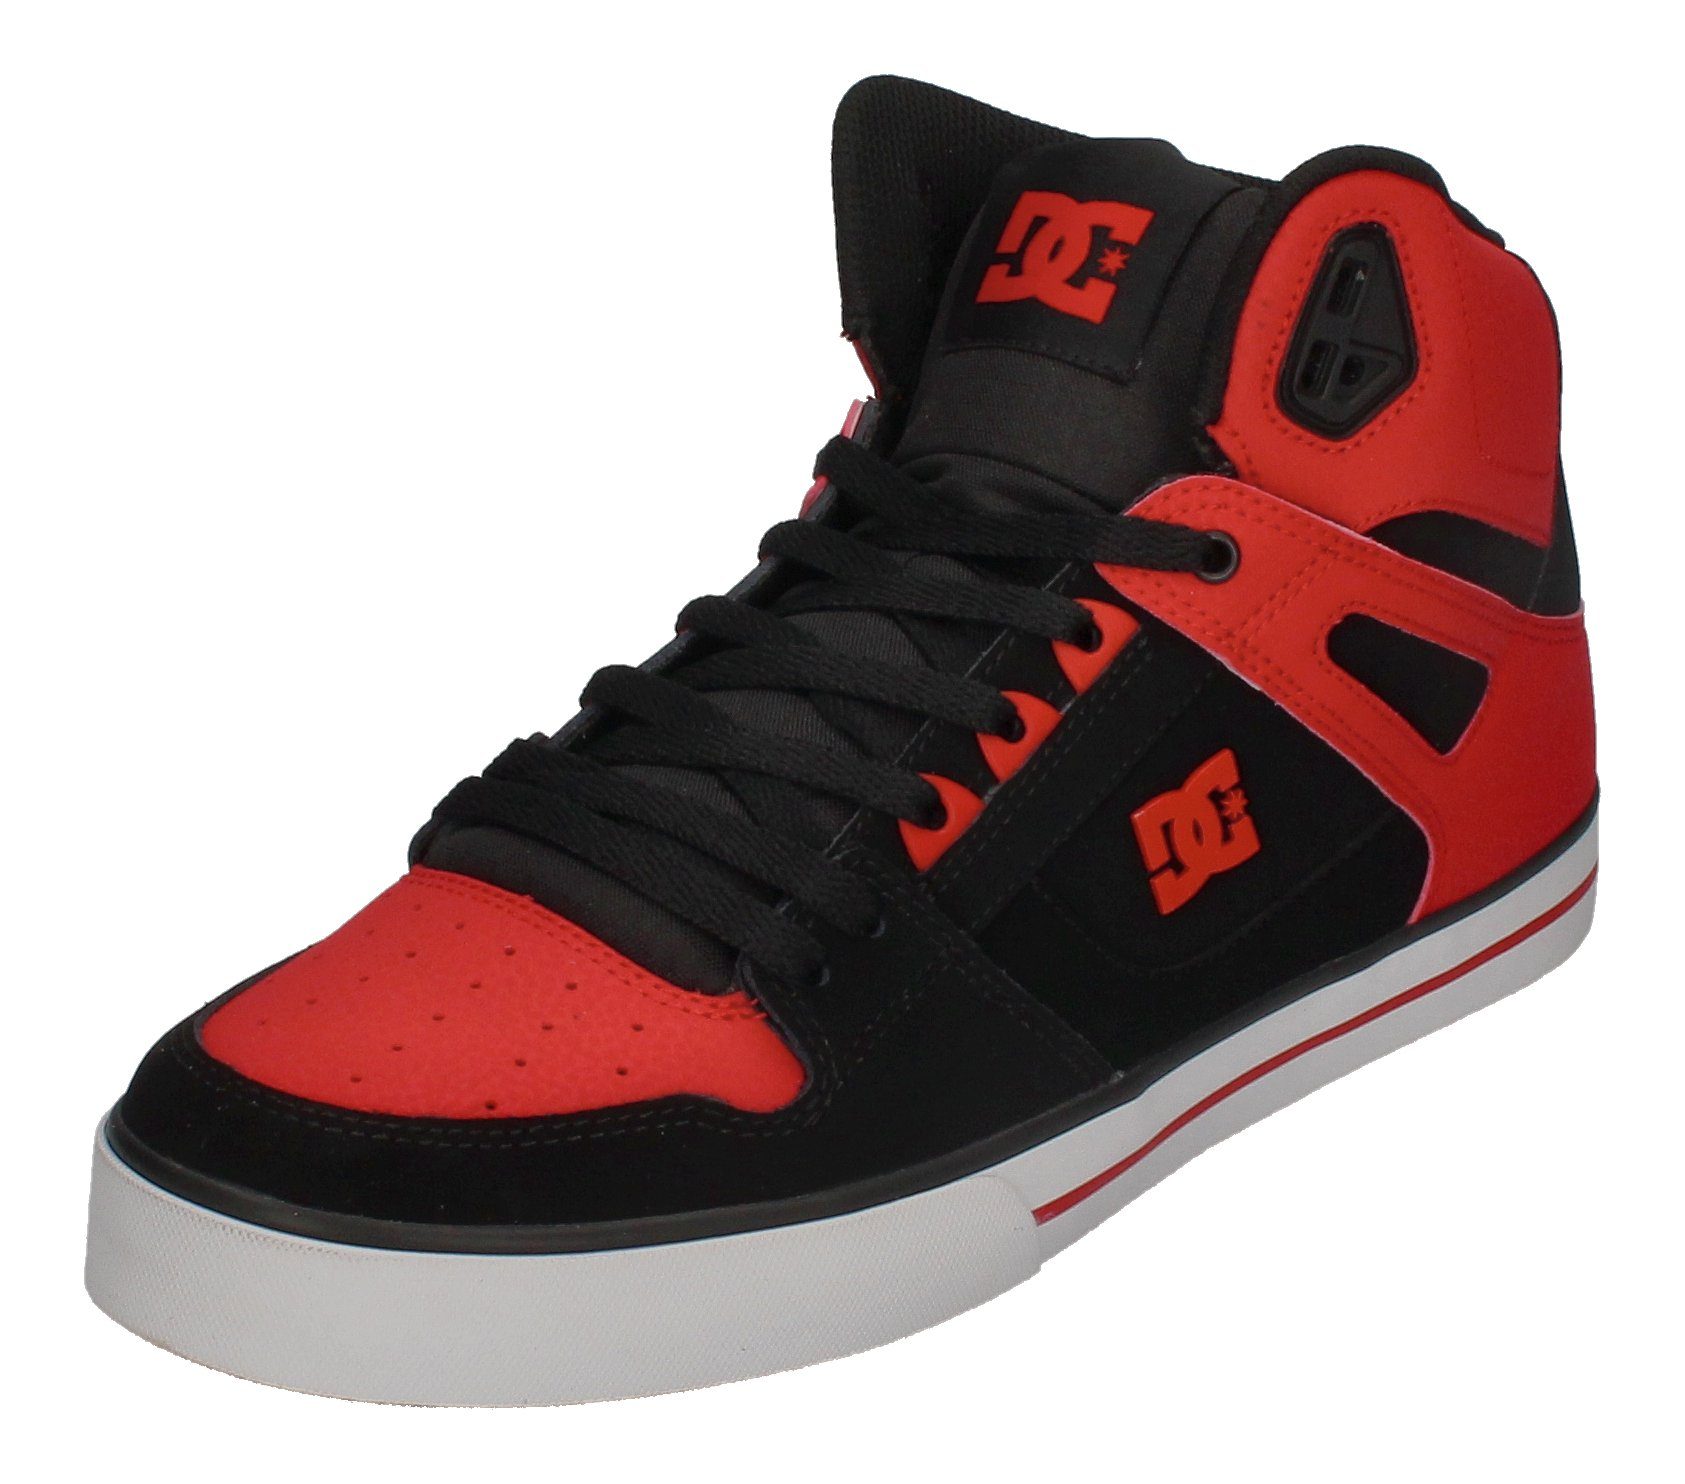 Schuhe Sneaker DC Shoes Pure HT WC ADYS400043 Skateschuh fiery red white black